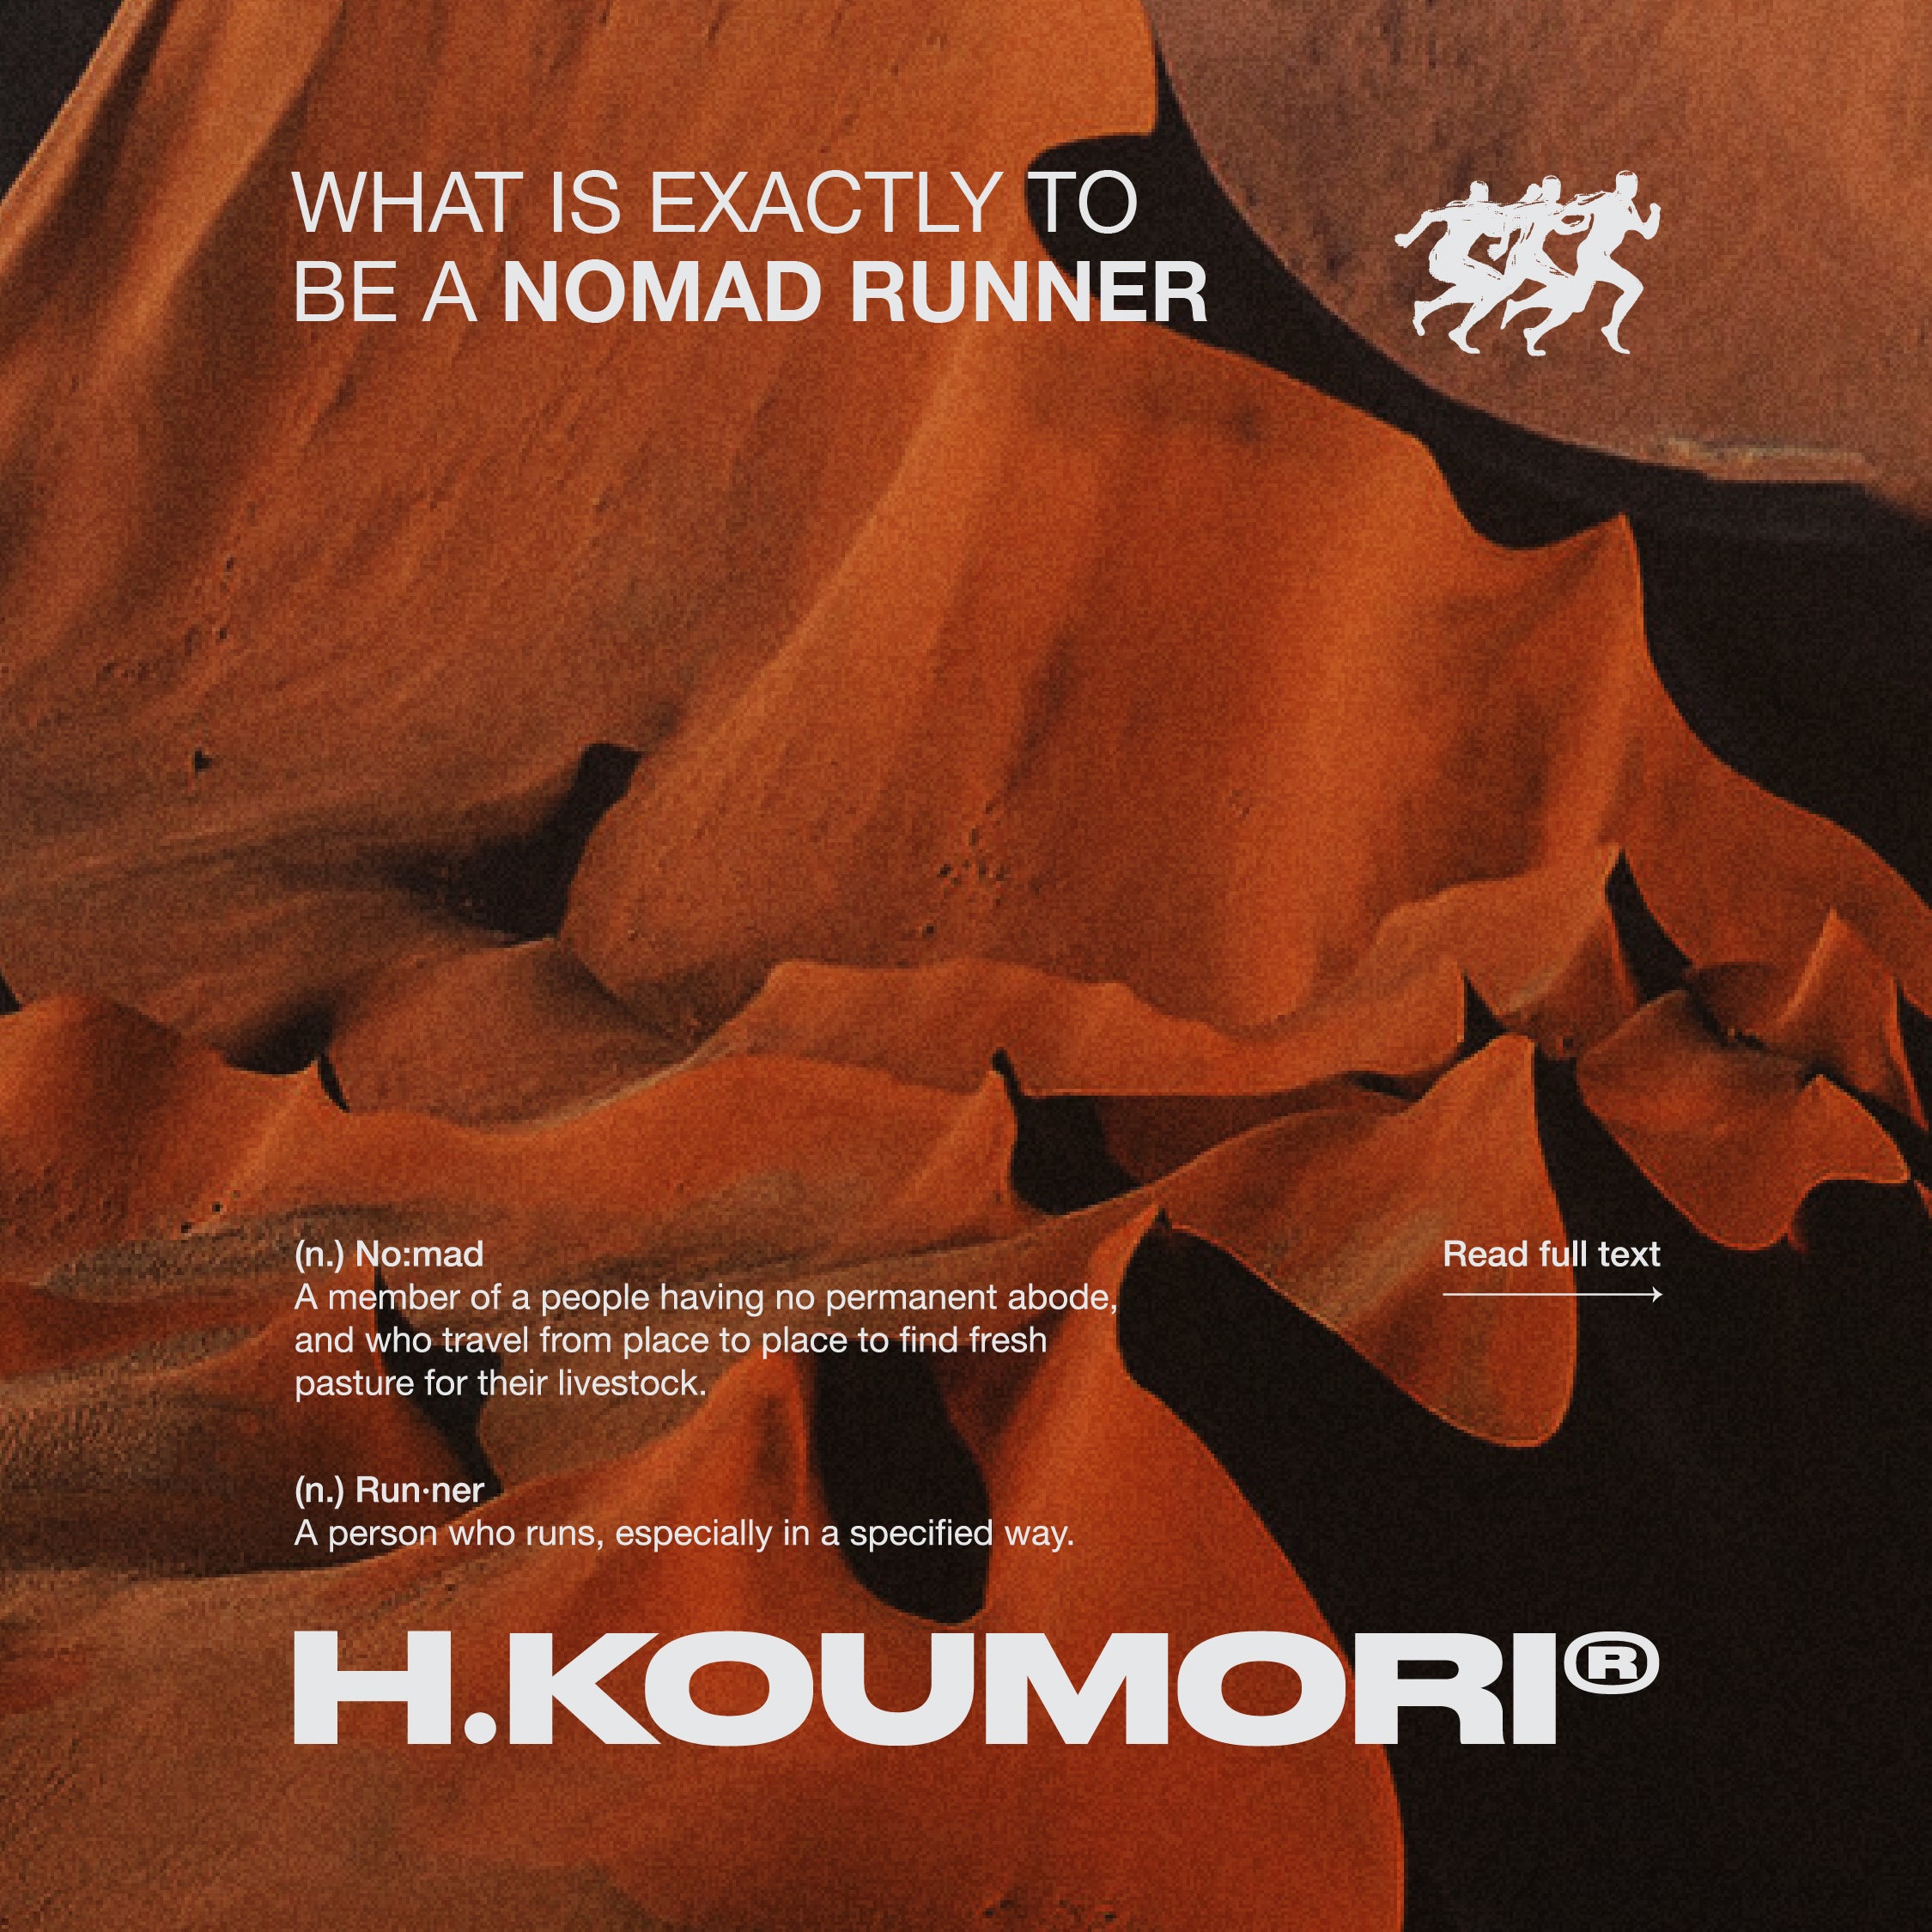 WHAT IS EXACTLY TO BE A NOMAD RUNNER